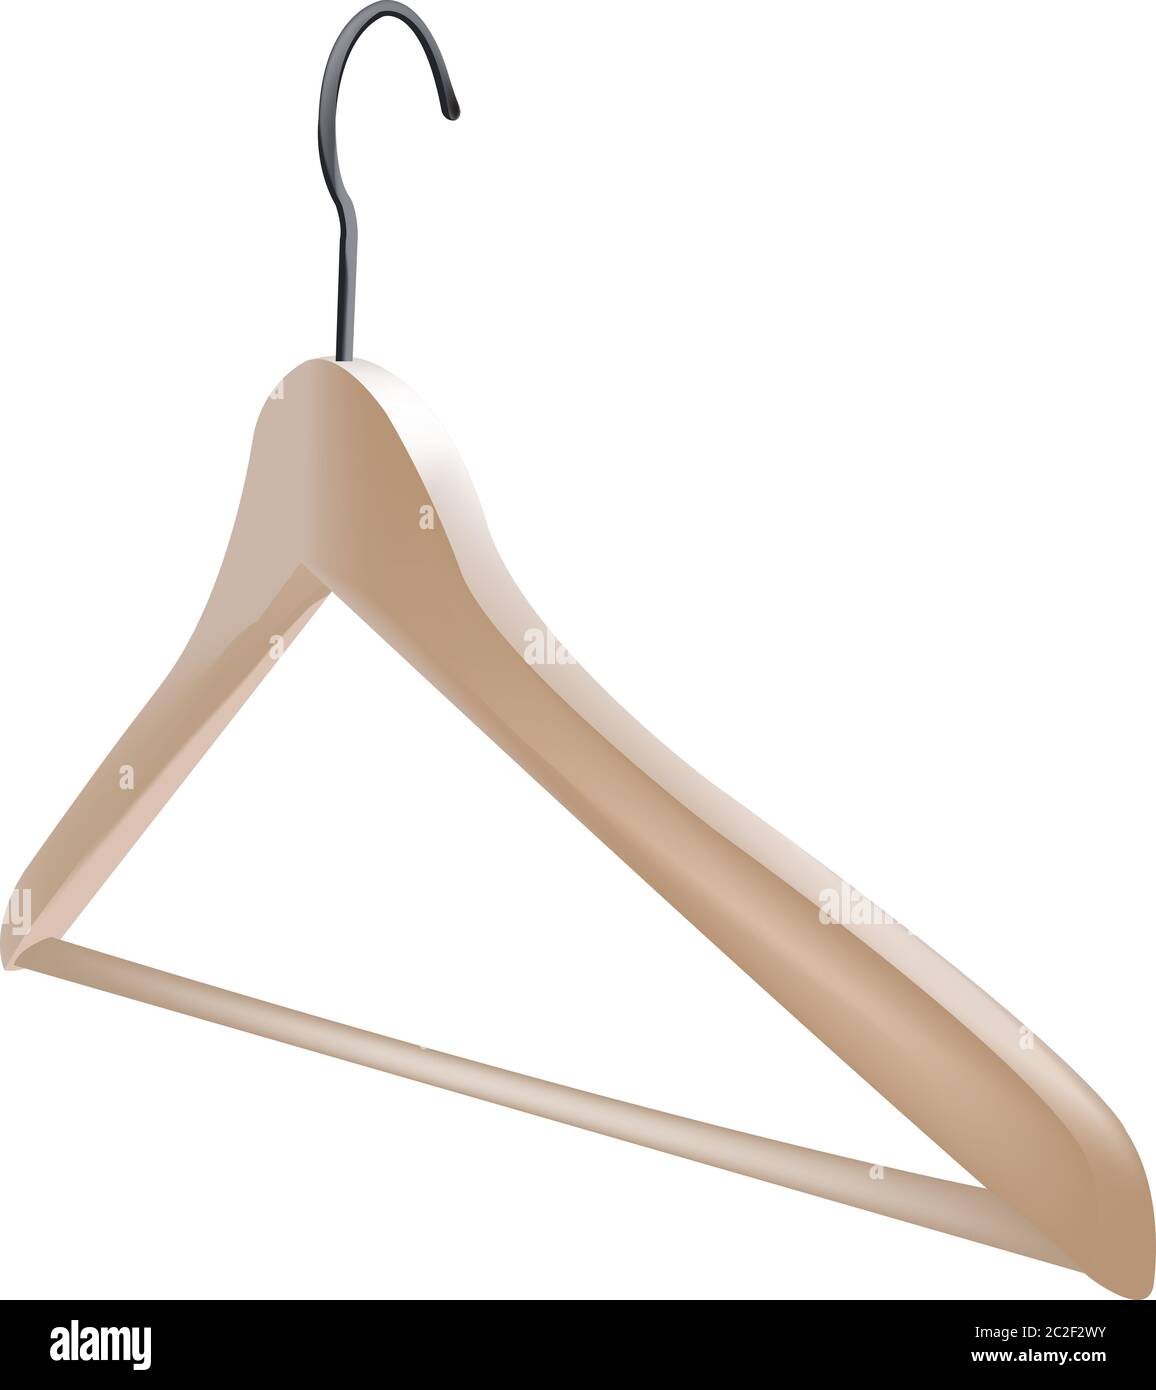 wooden hanger with hook Stock Photo